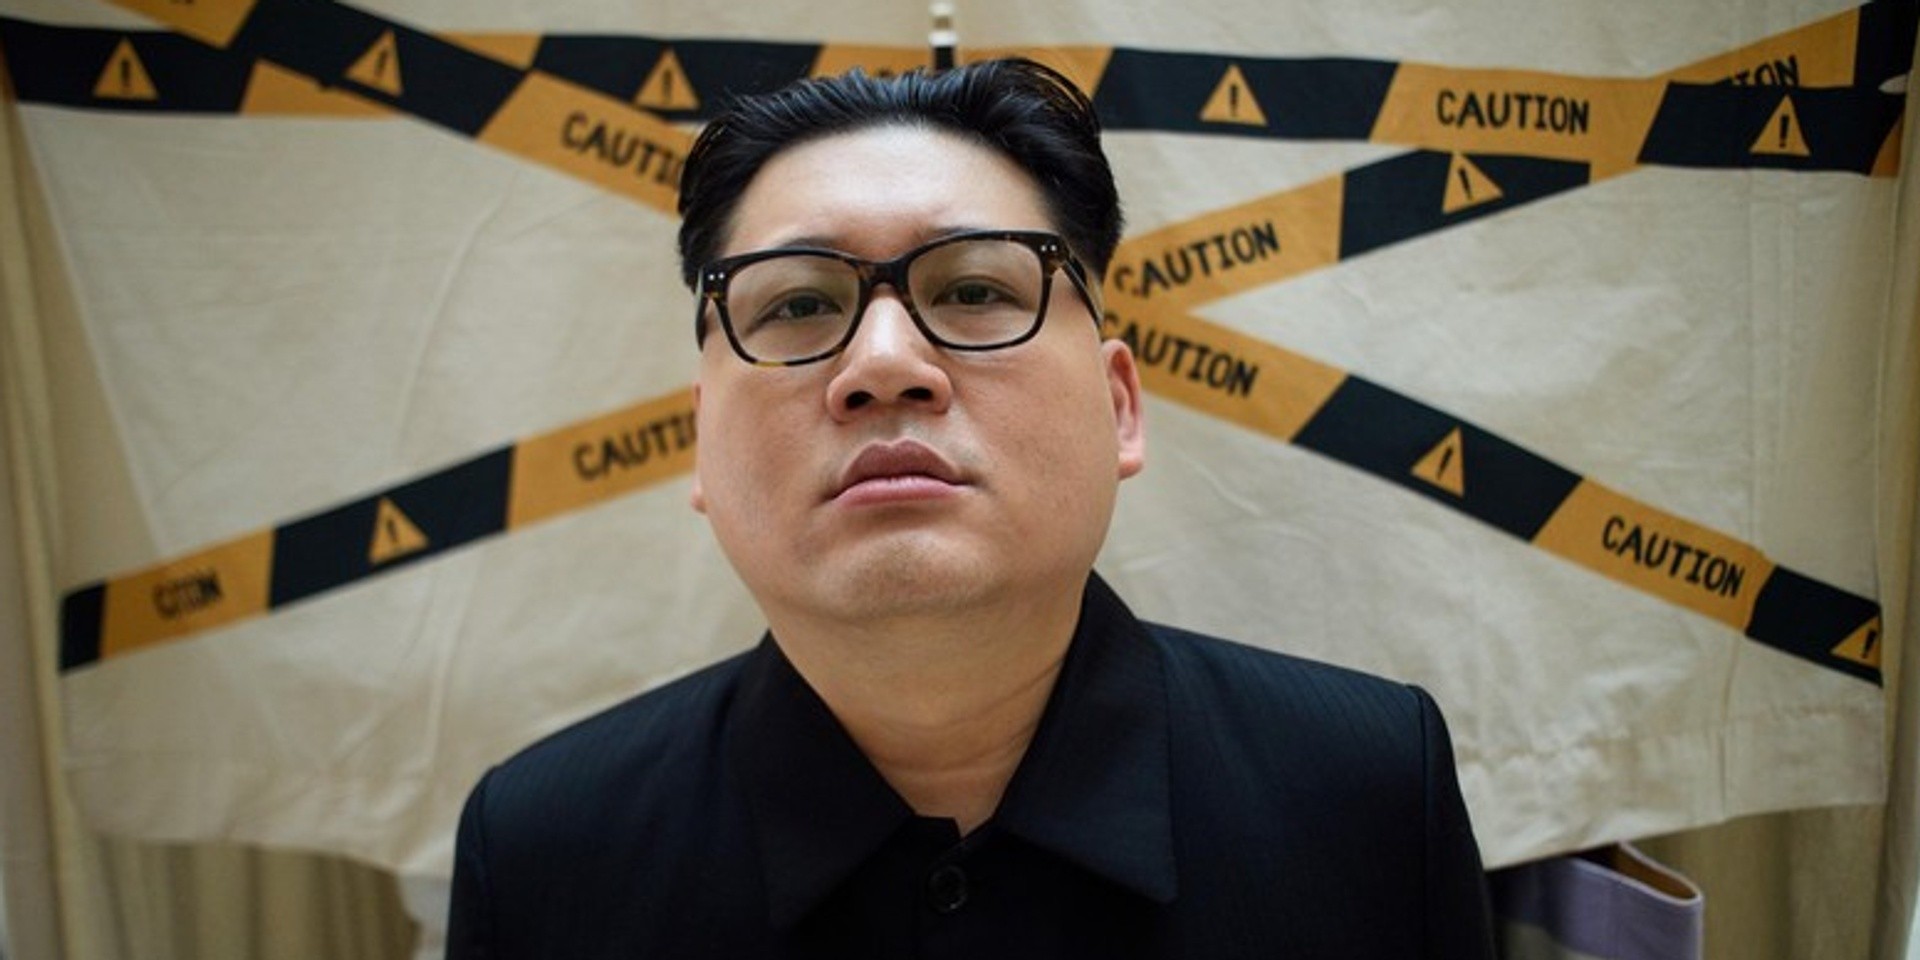 Remember that Kim Jong-un impersonator? Turns out he's a musician who has worked with Joanna Dong